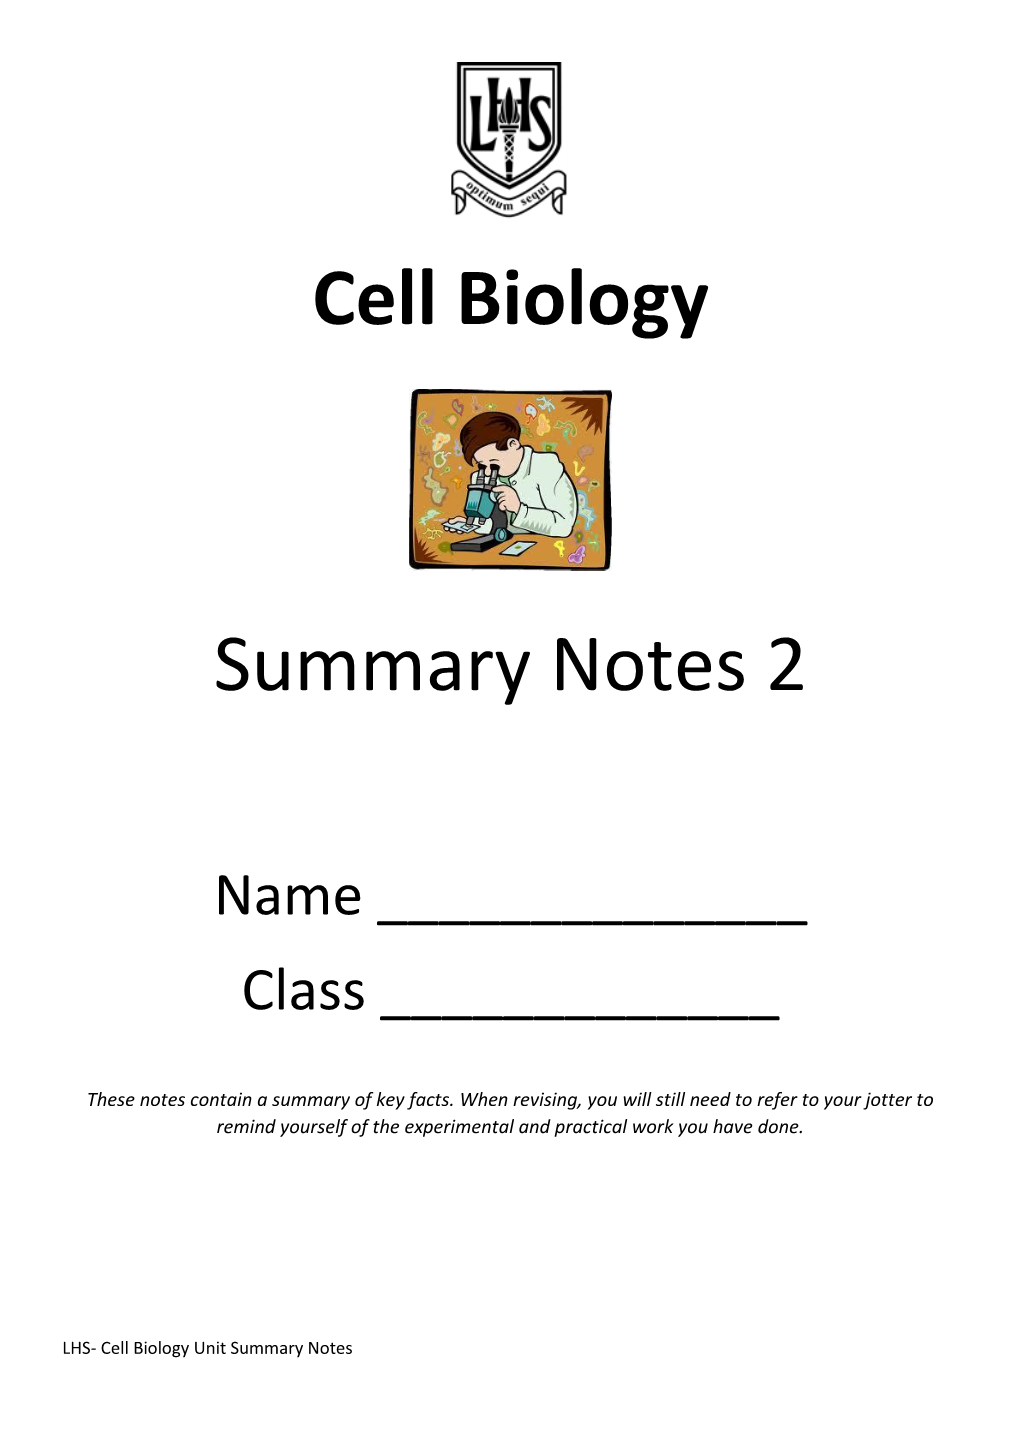 Cell Biology Summary Notes 2